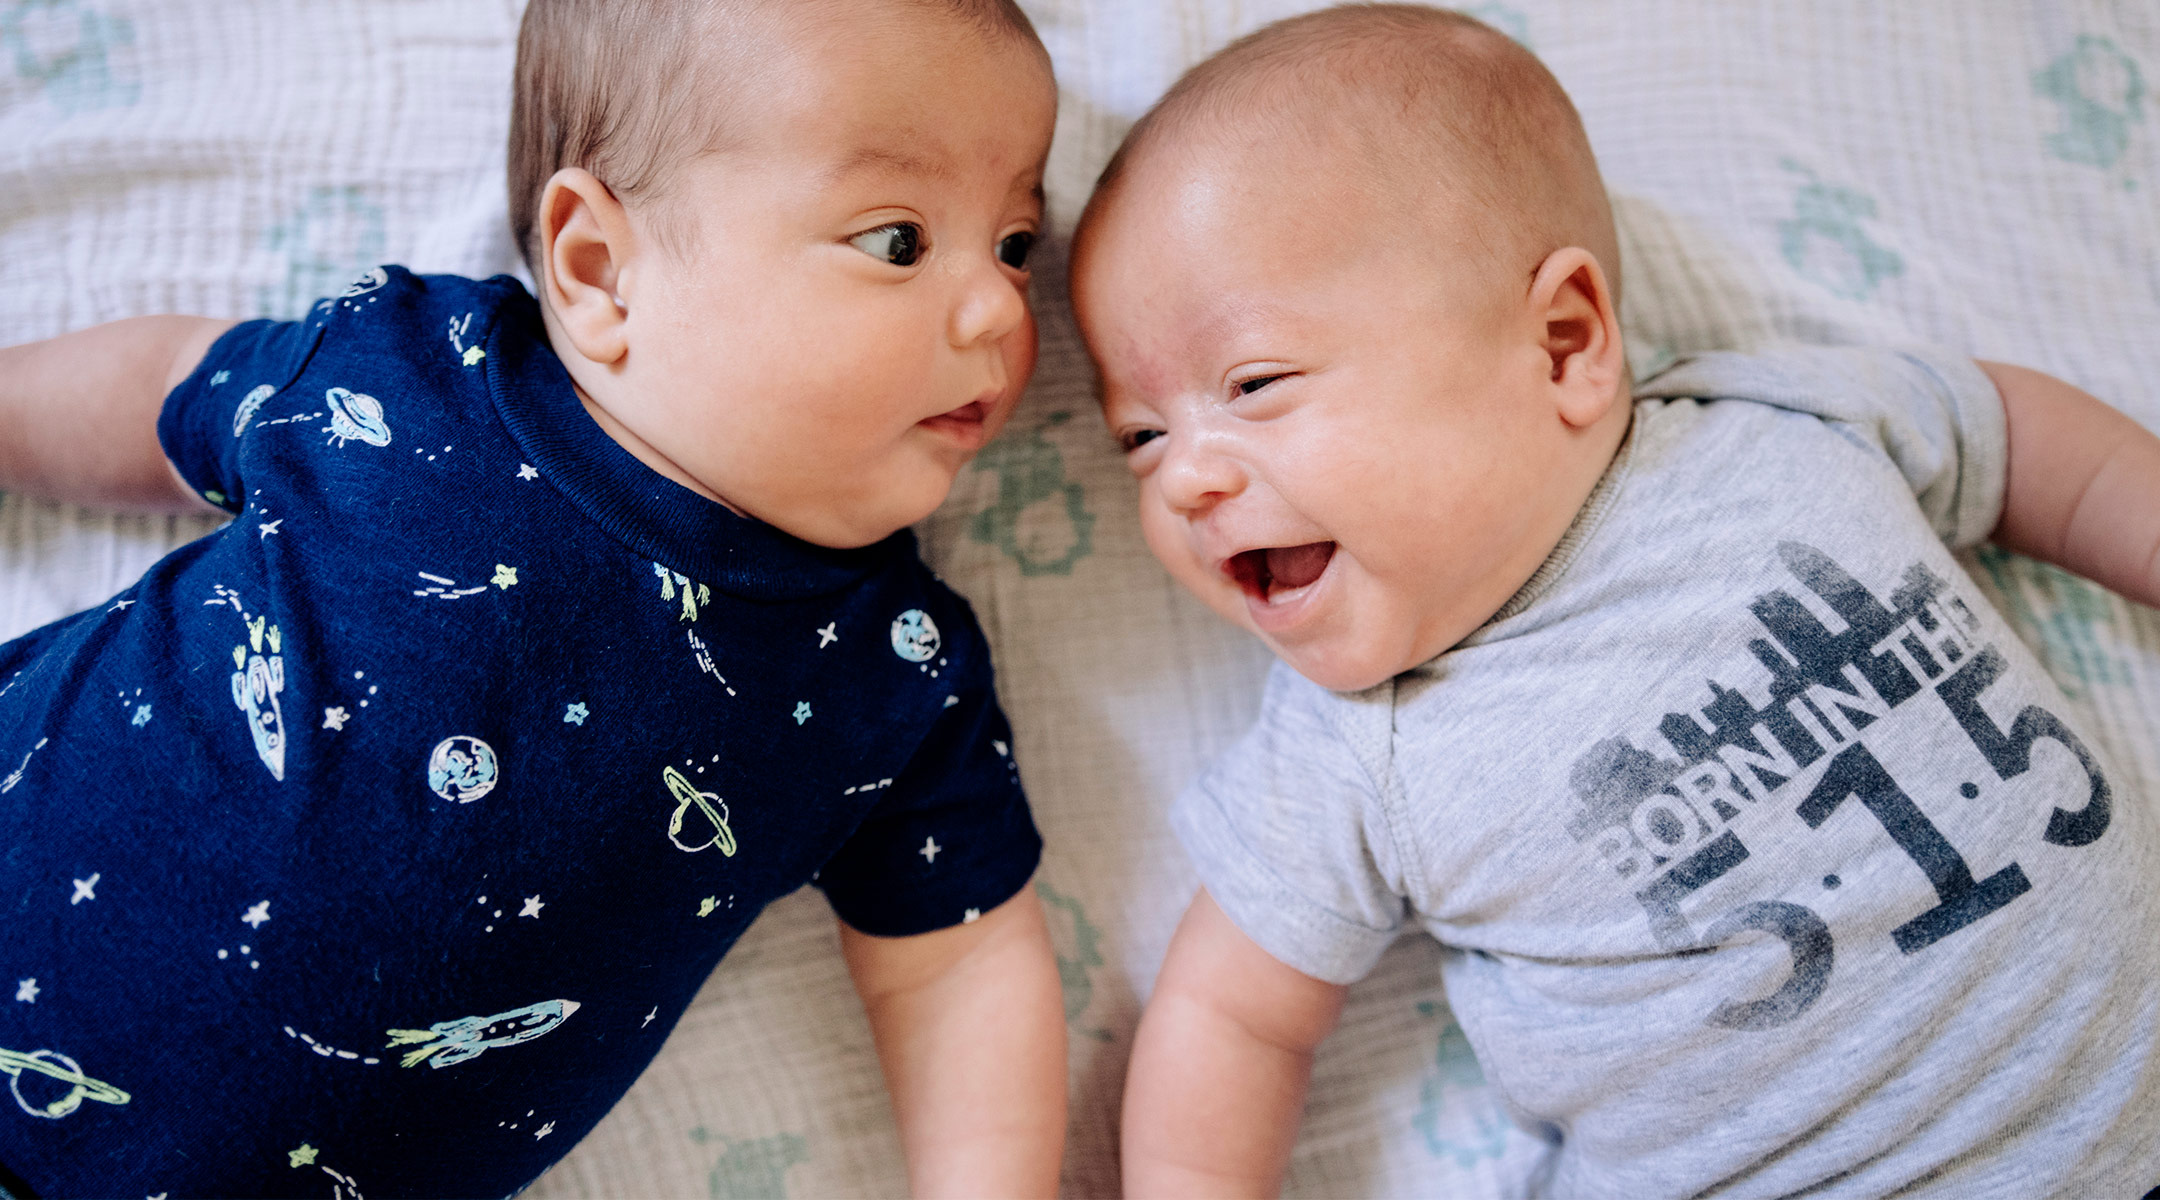 baby twins interacting with each other